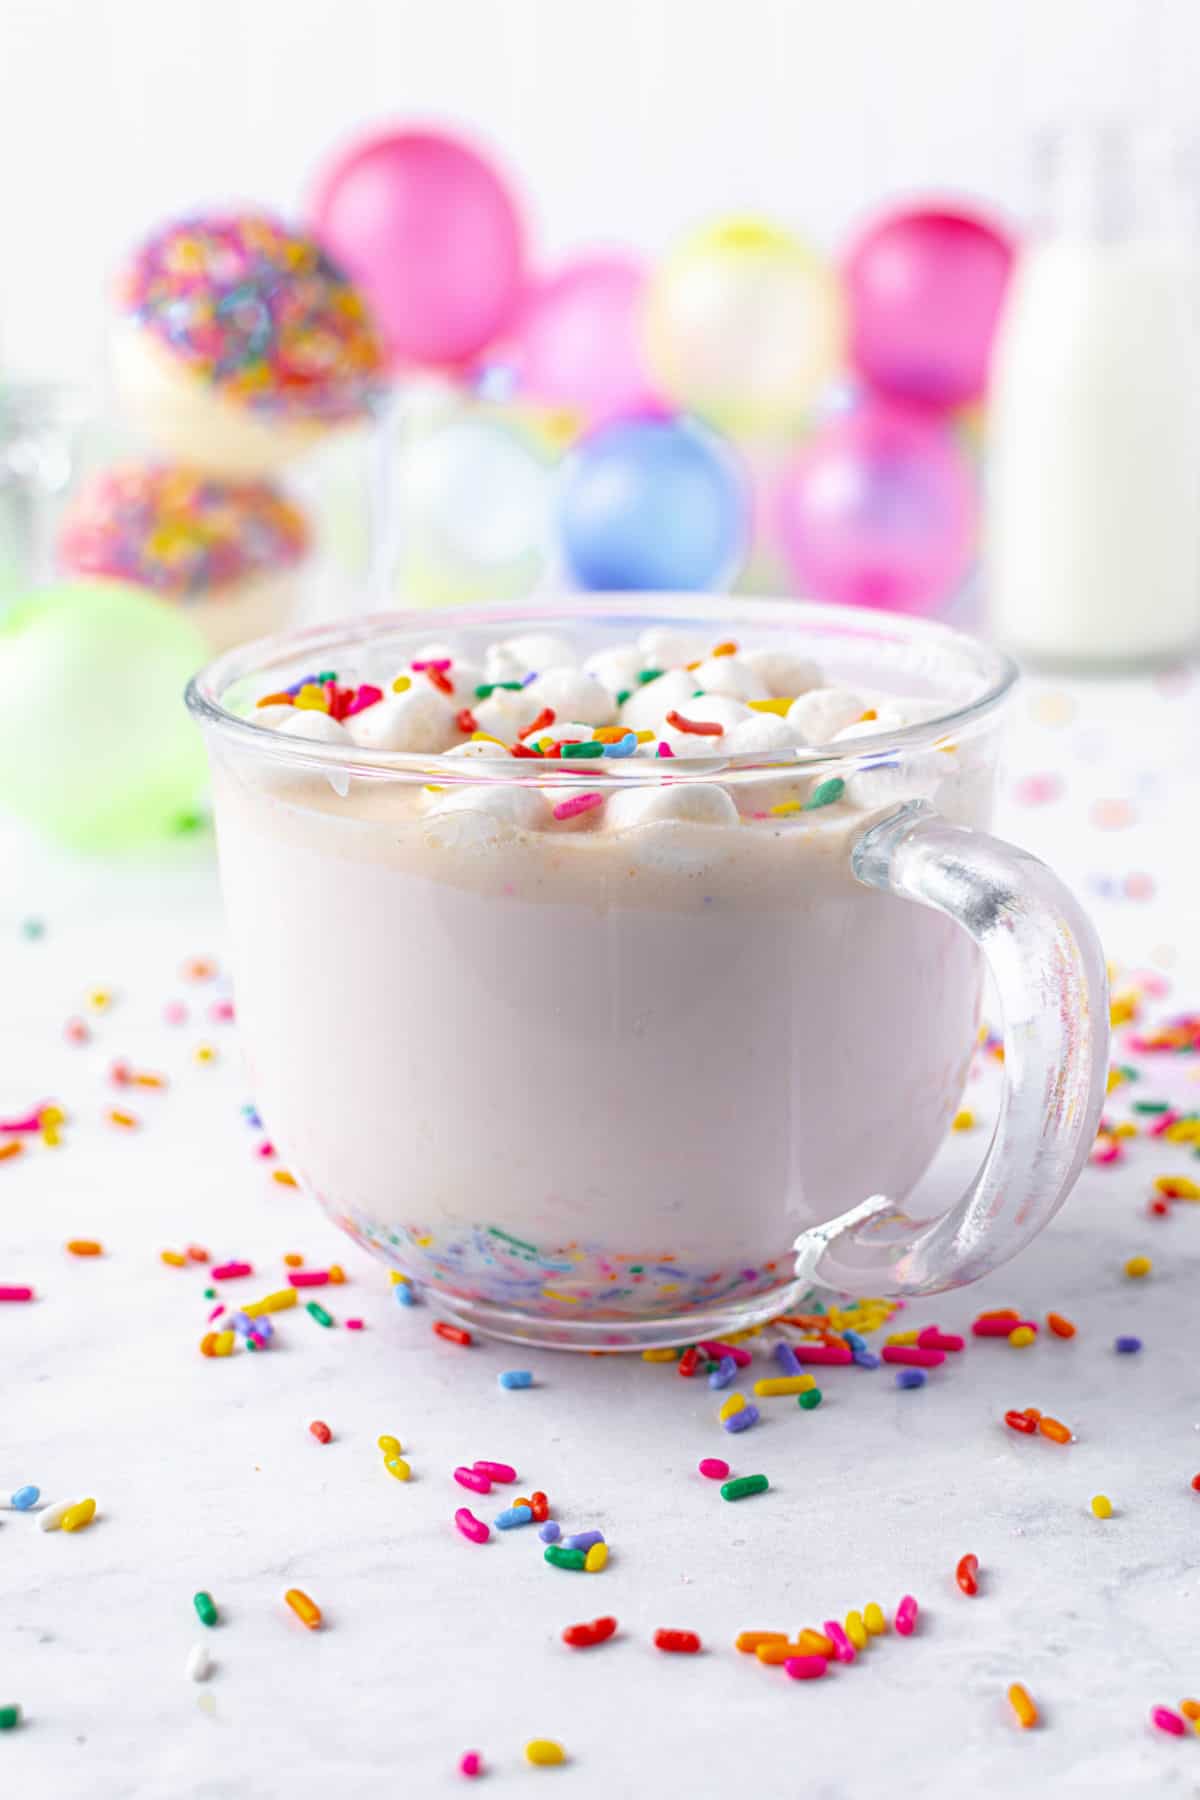 Hot cocoa bomb in mug of warm milk with sprinkles.